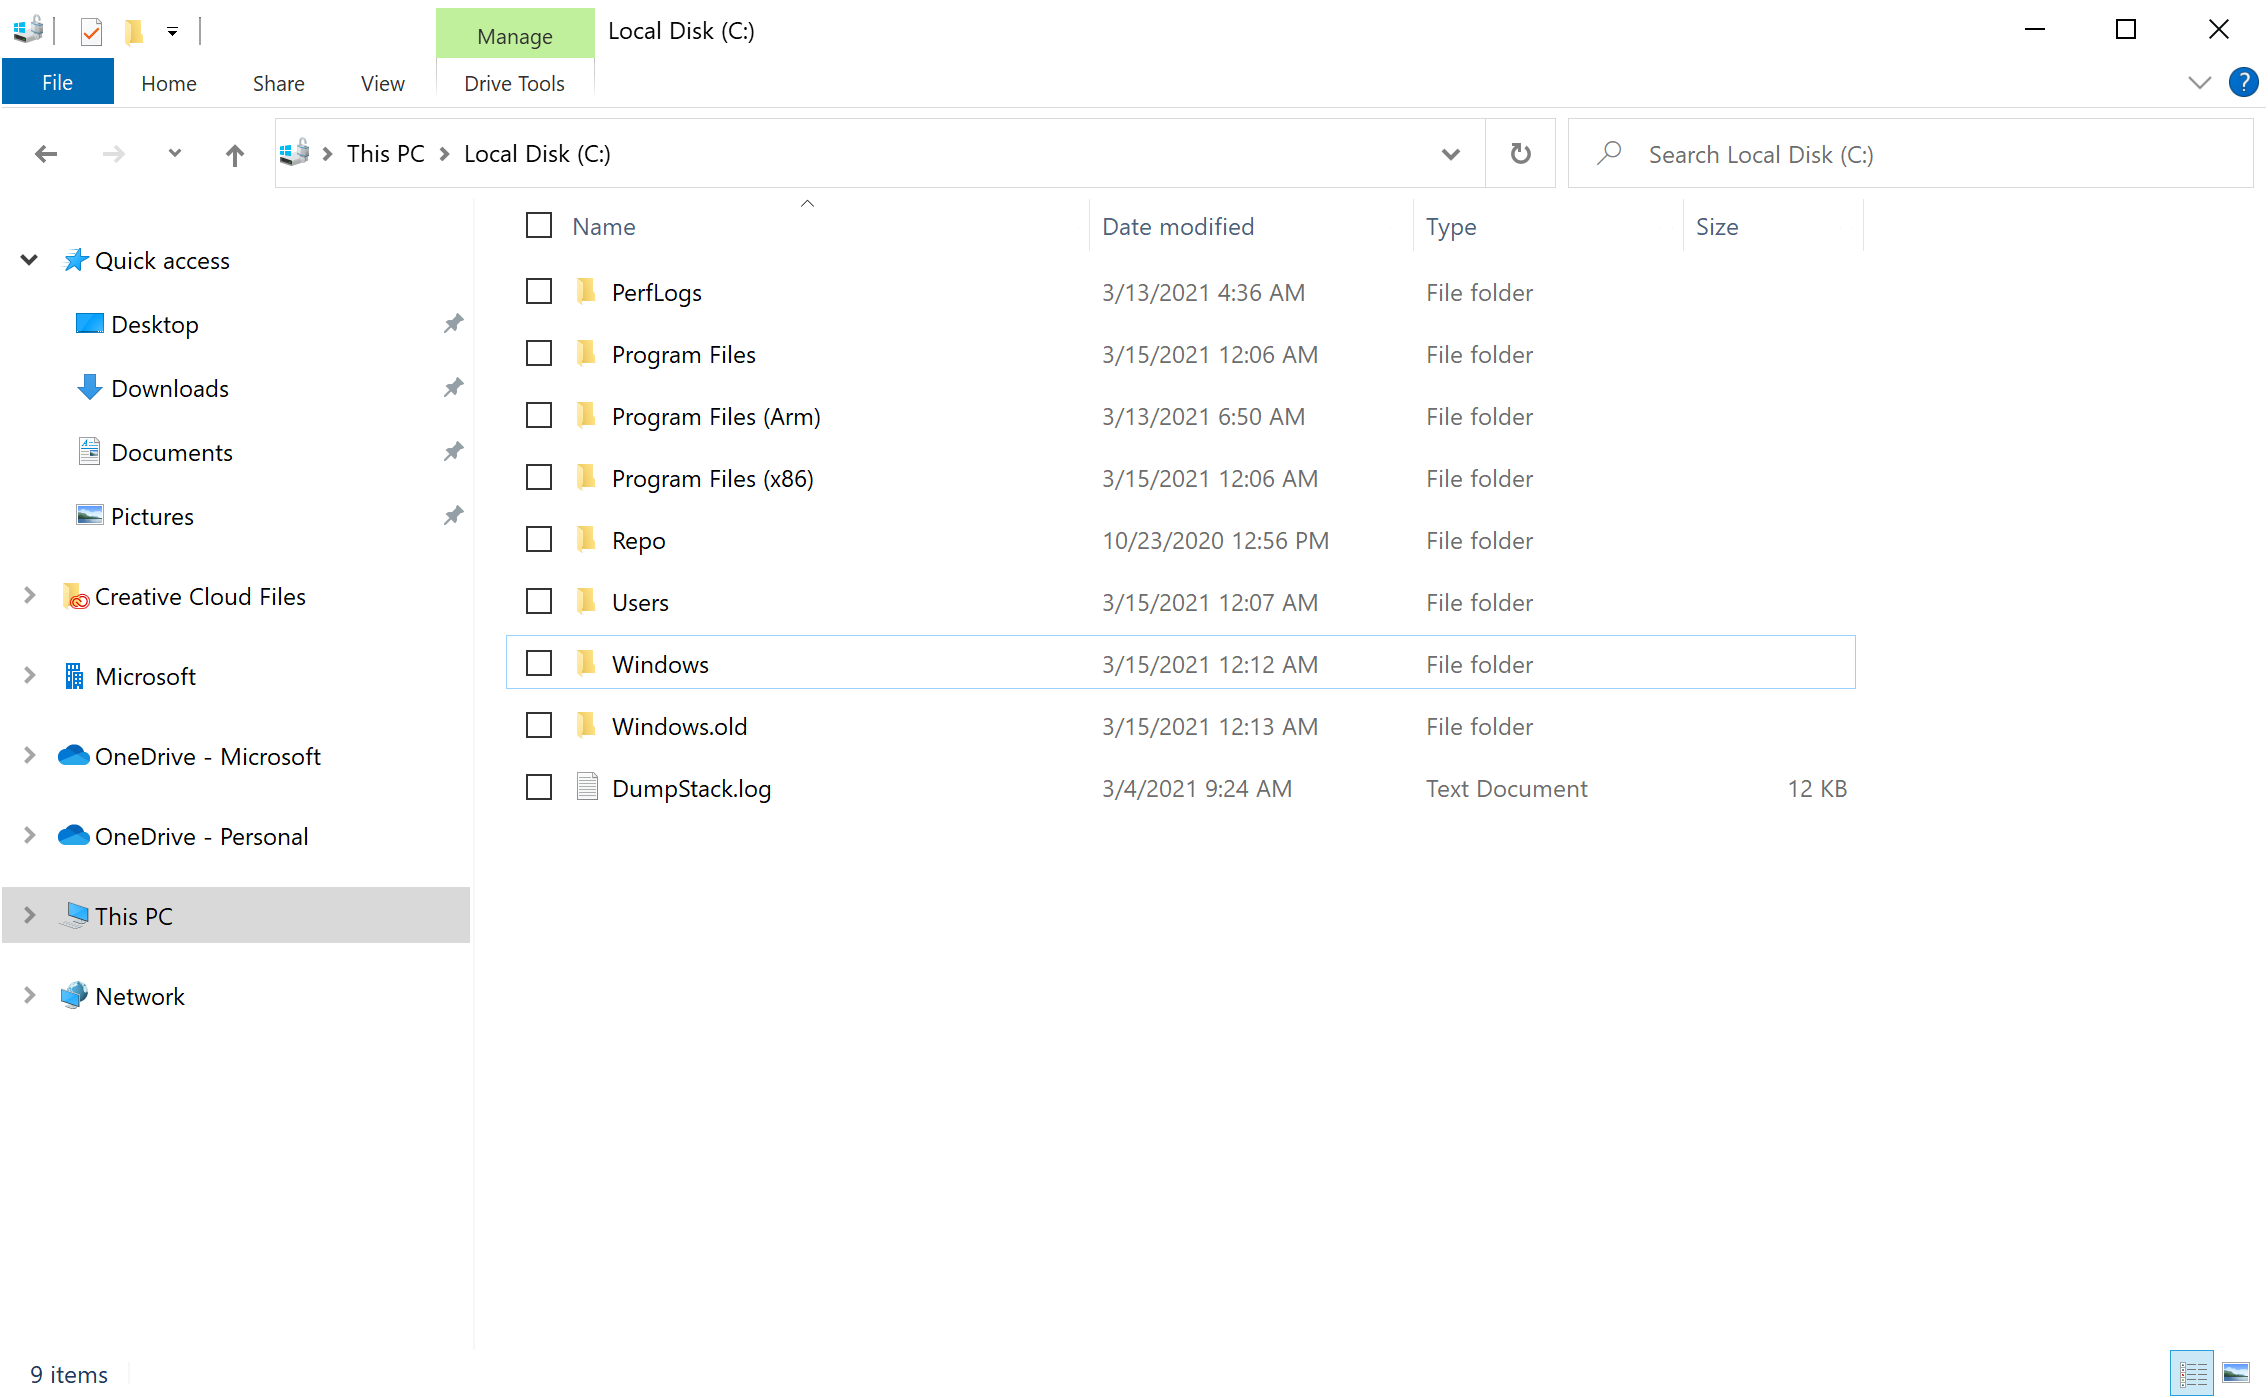 The default layout of File Explorer adds additional padding between elements.